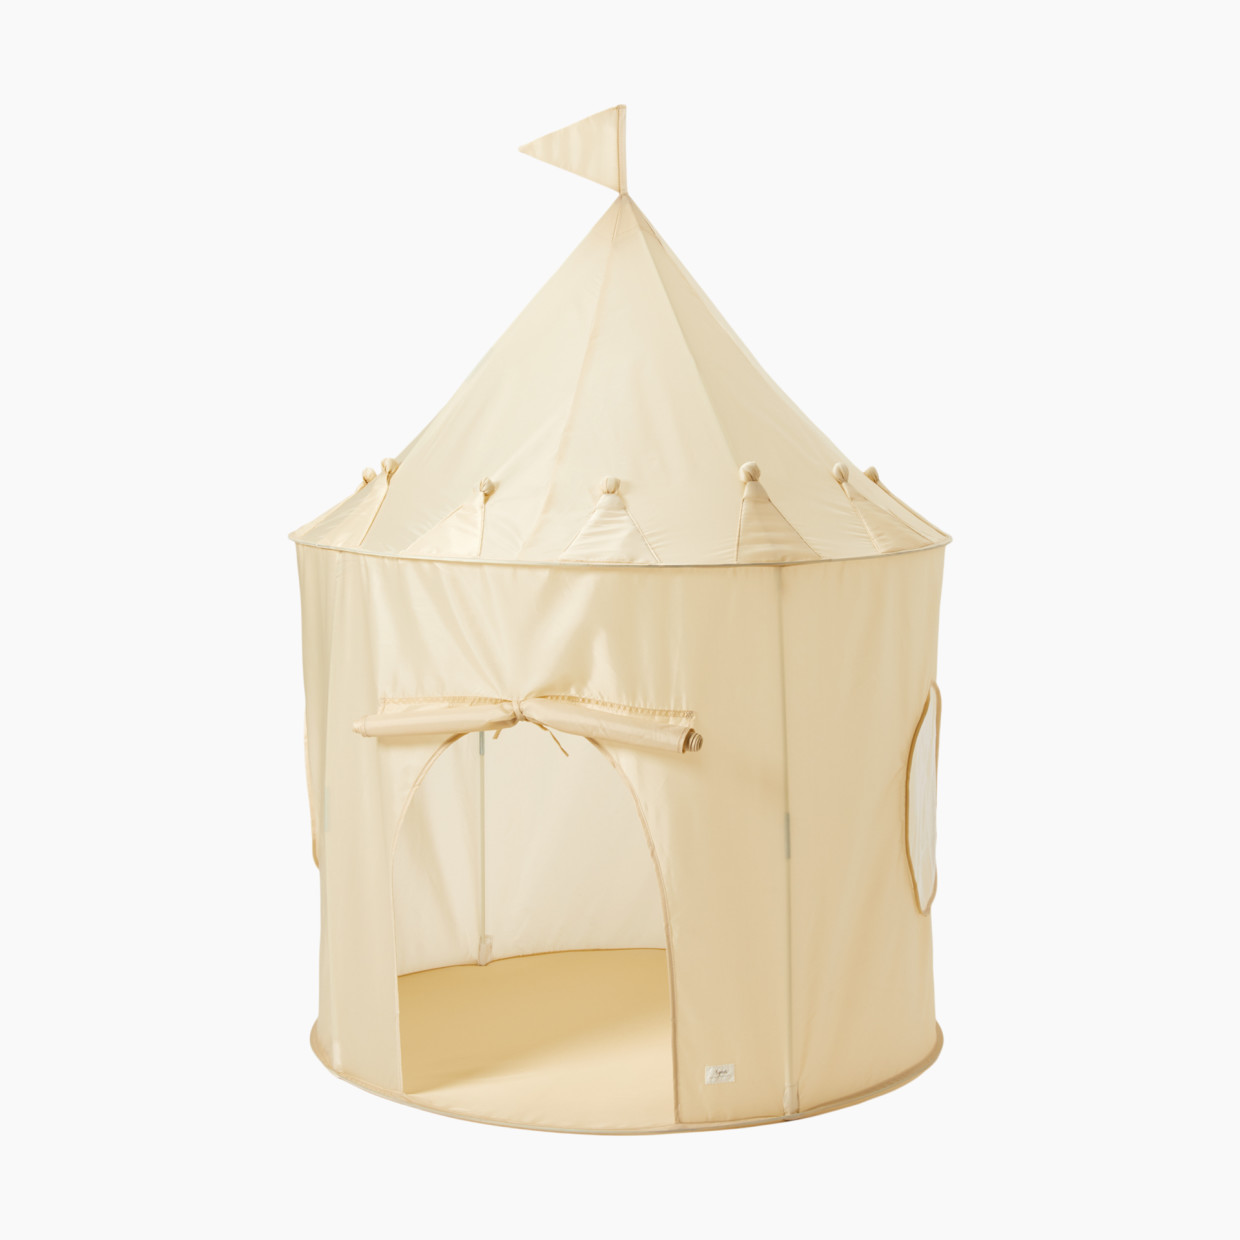 3 Sprouts Recycled Tent - Beige.